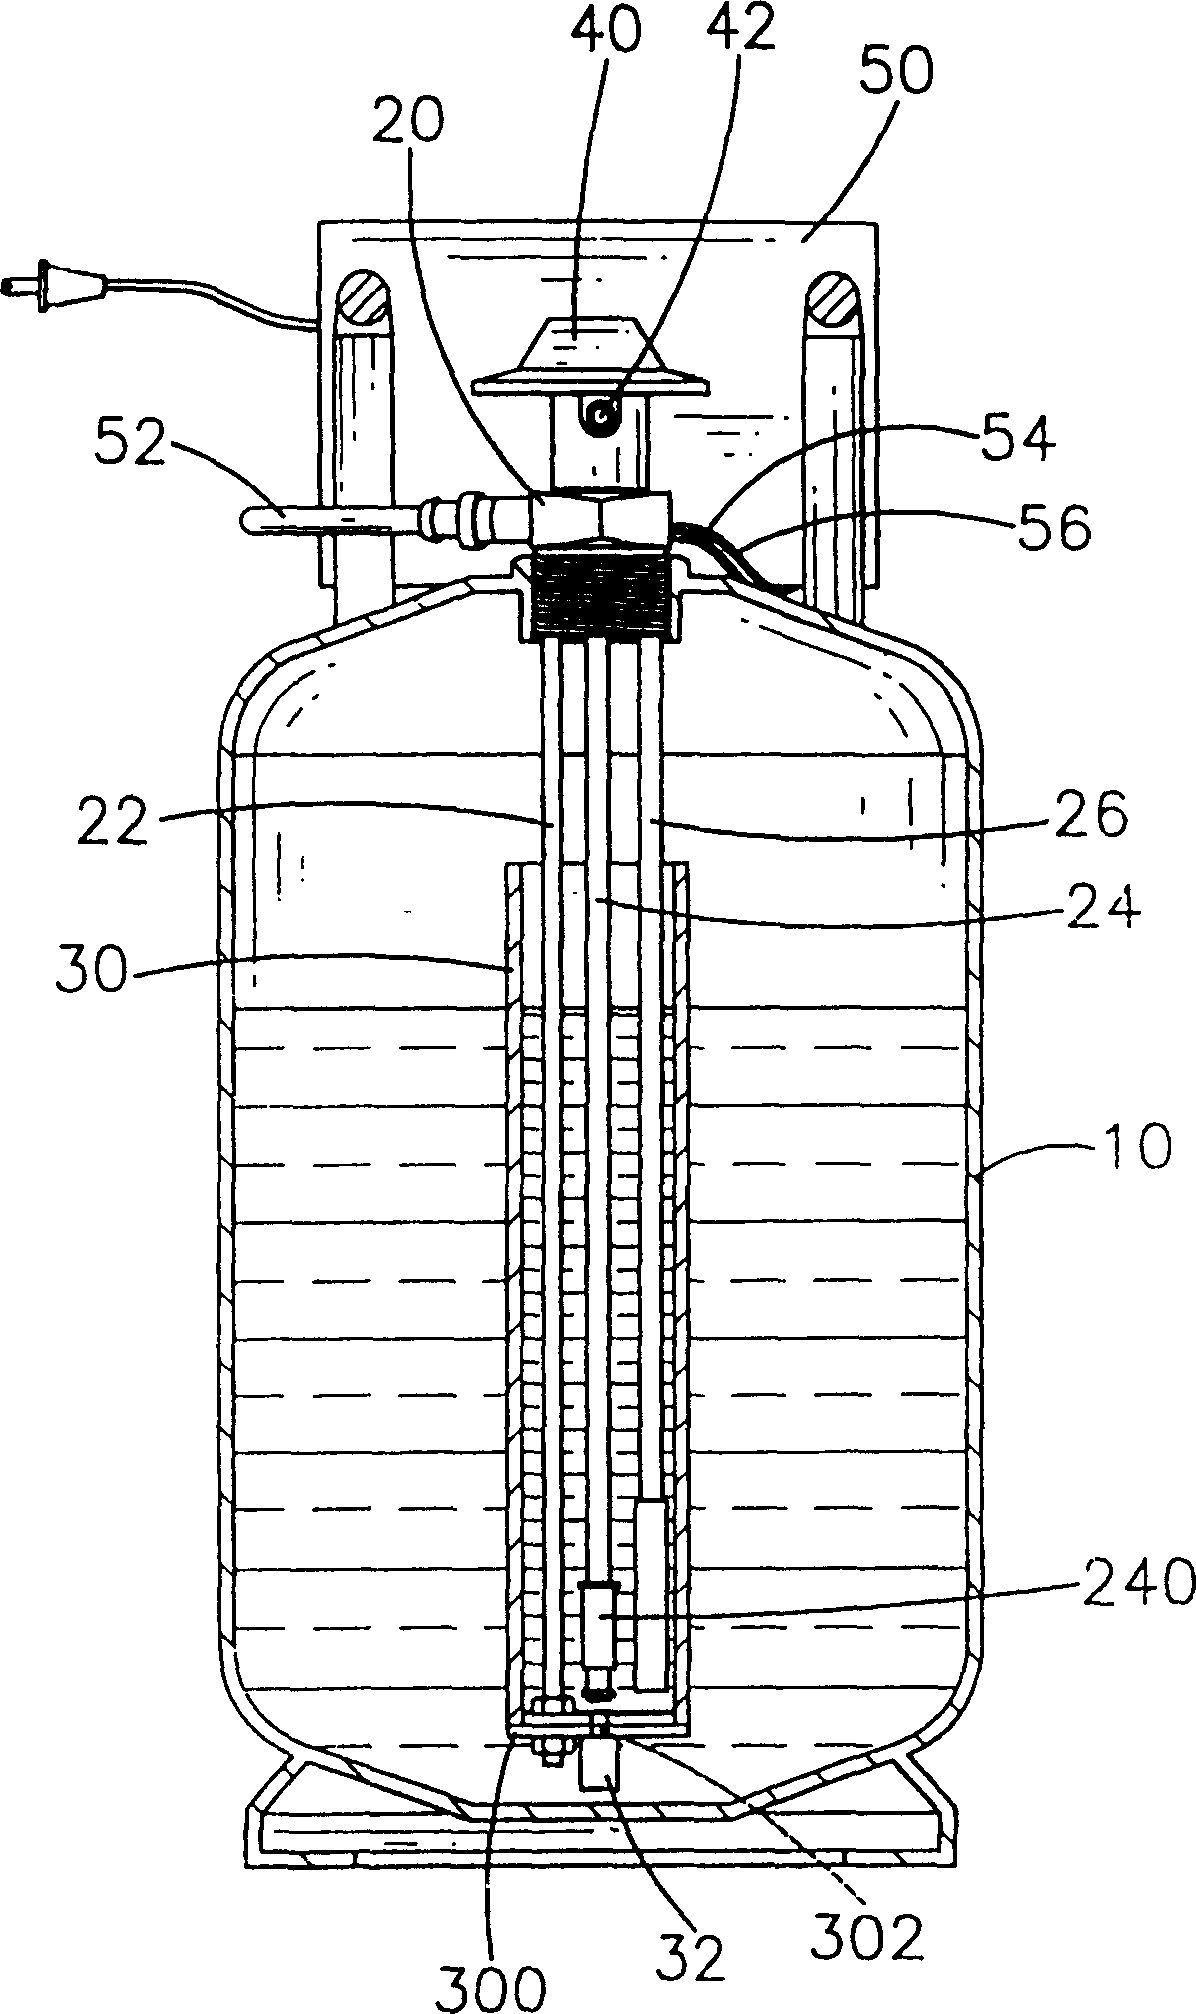 Constant temp gas supply device for liquid state fuel tank